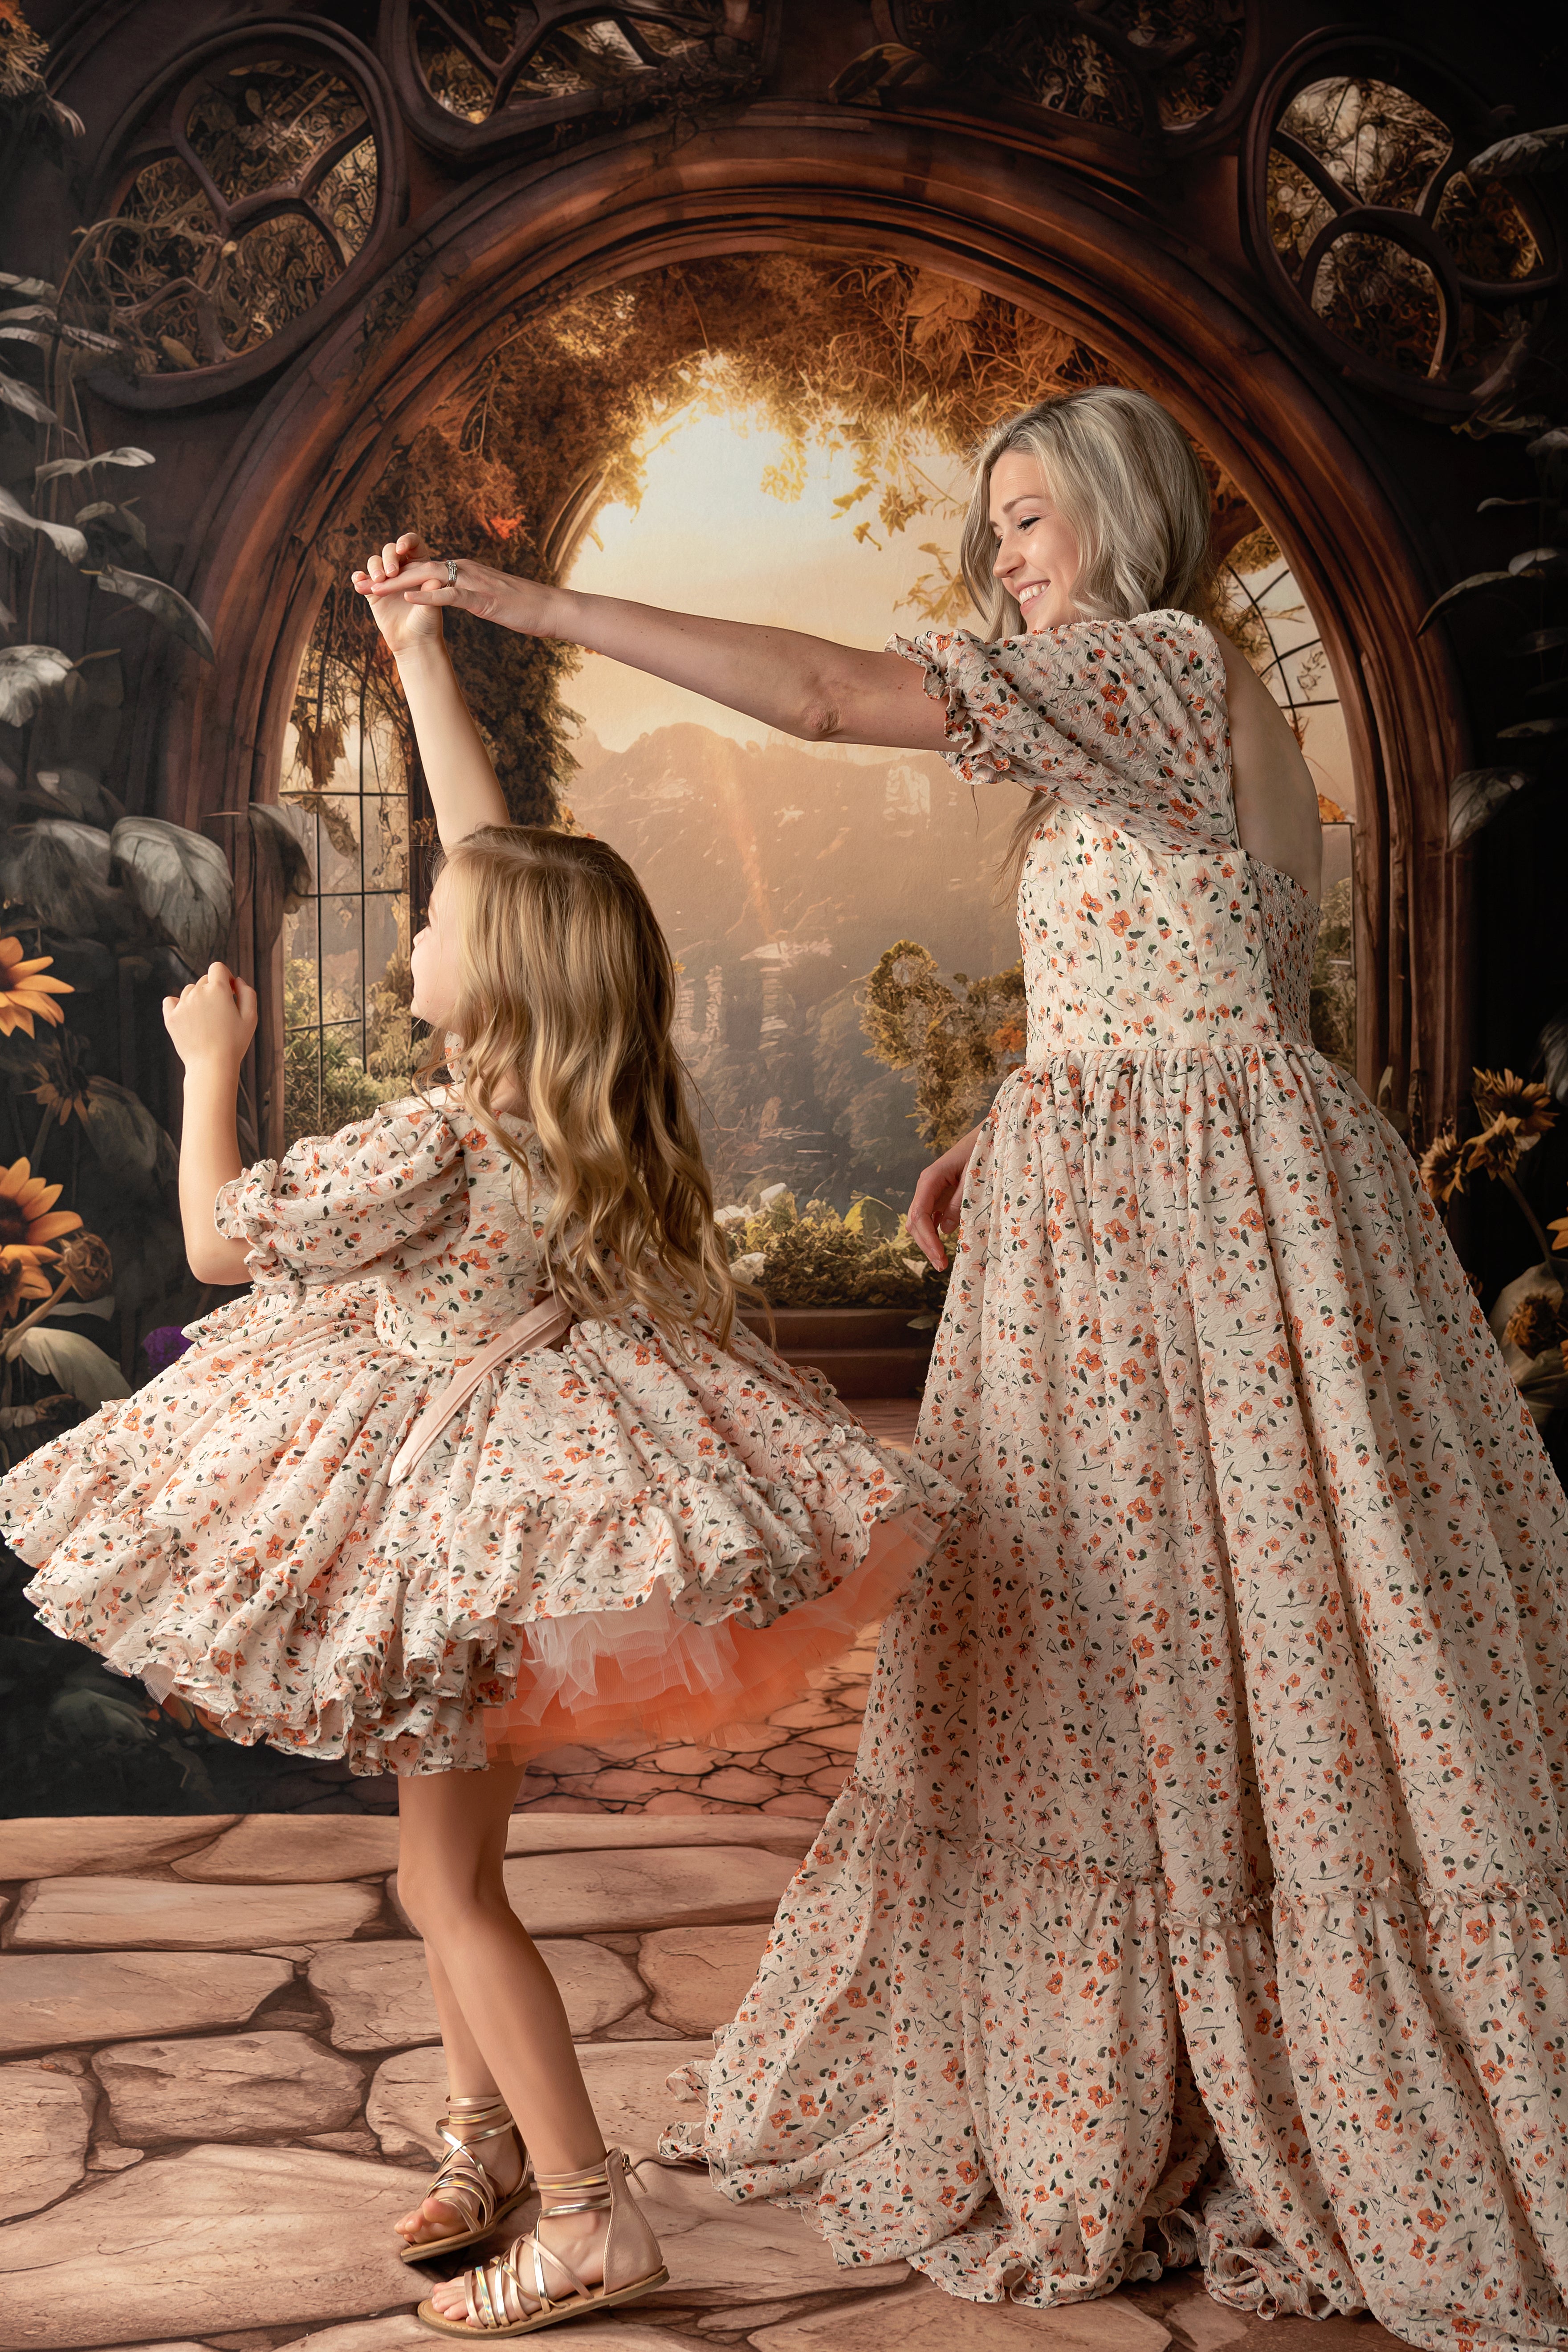 Floral Revival  Ivory/Peach (6-7 year)